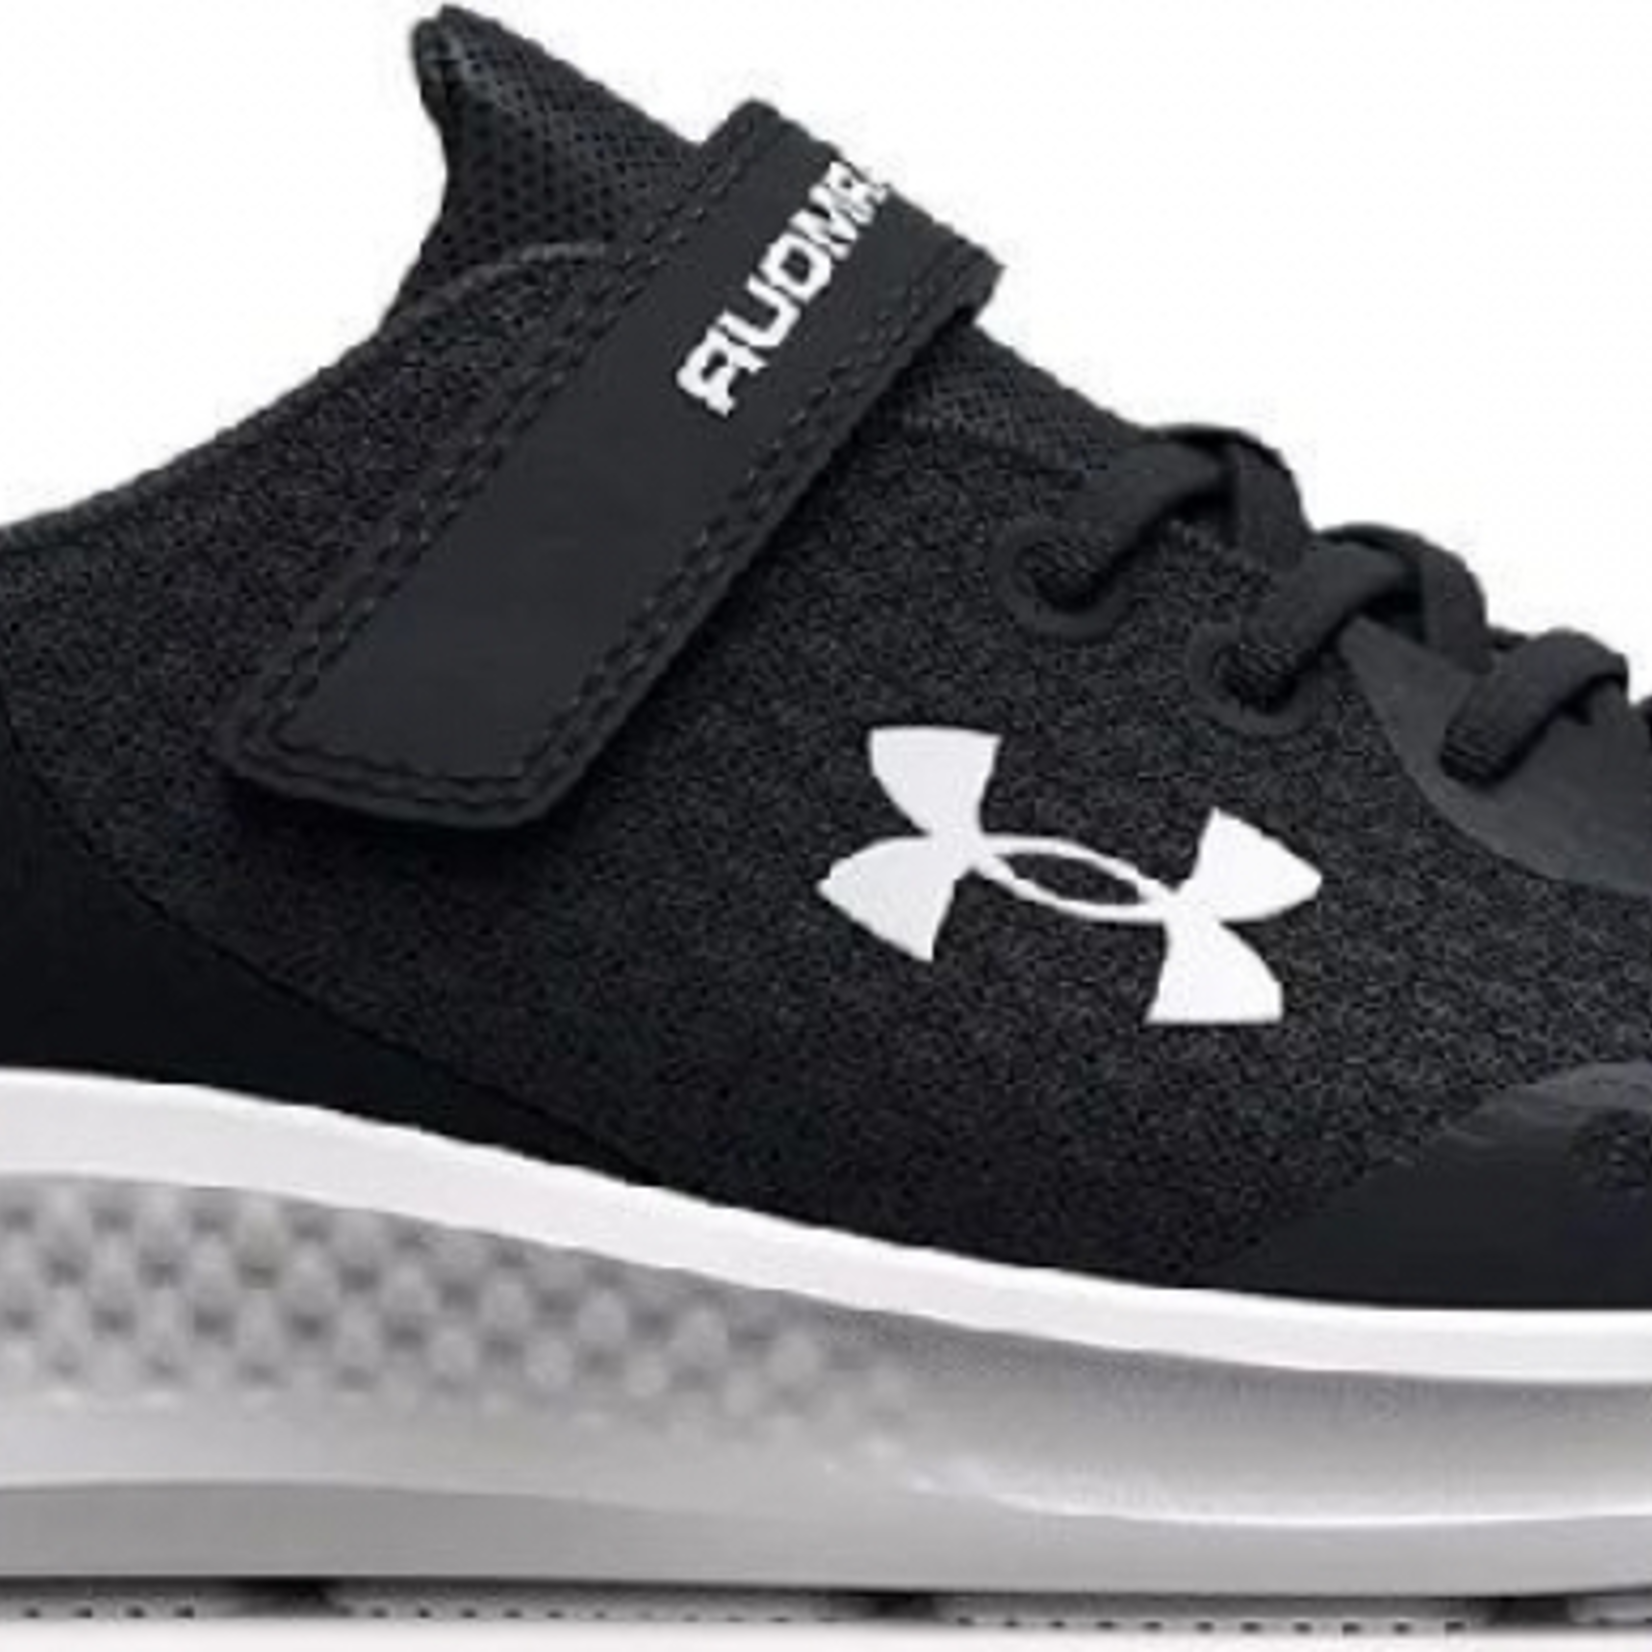 Under Armour Under Armour Running Shoes, Pursuit 3 AC, BPS, Boys